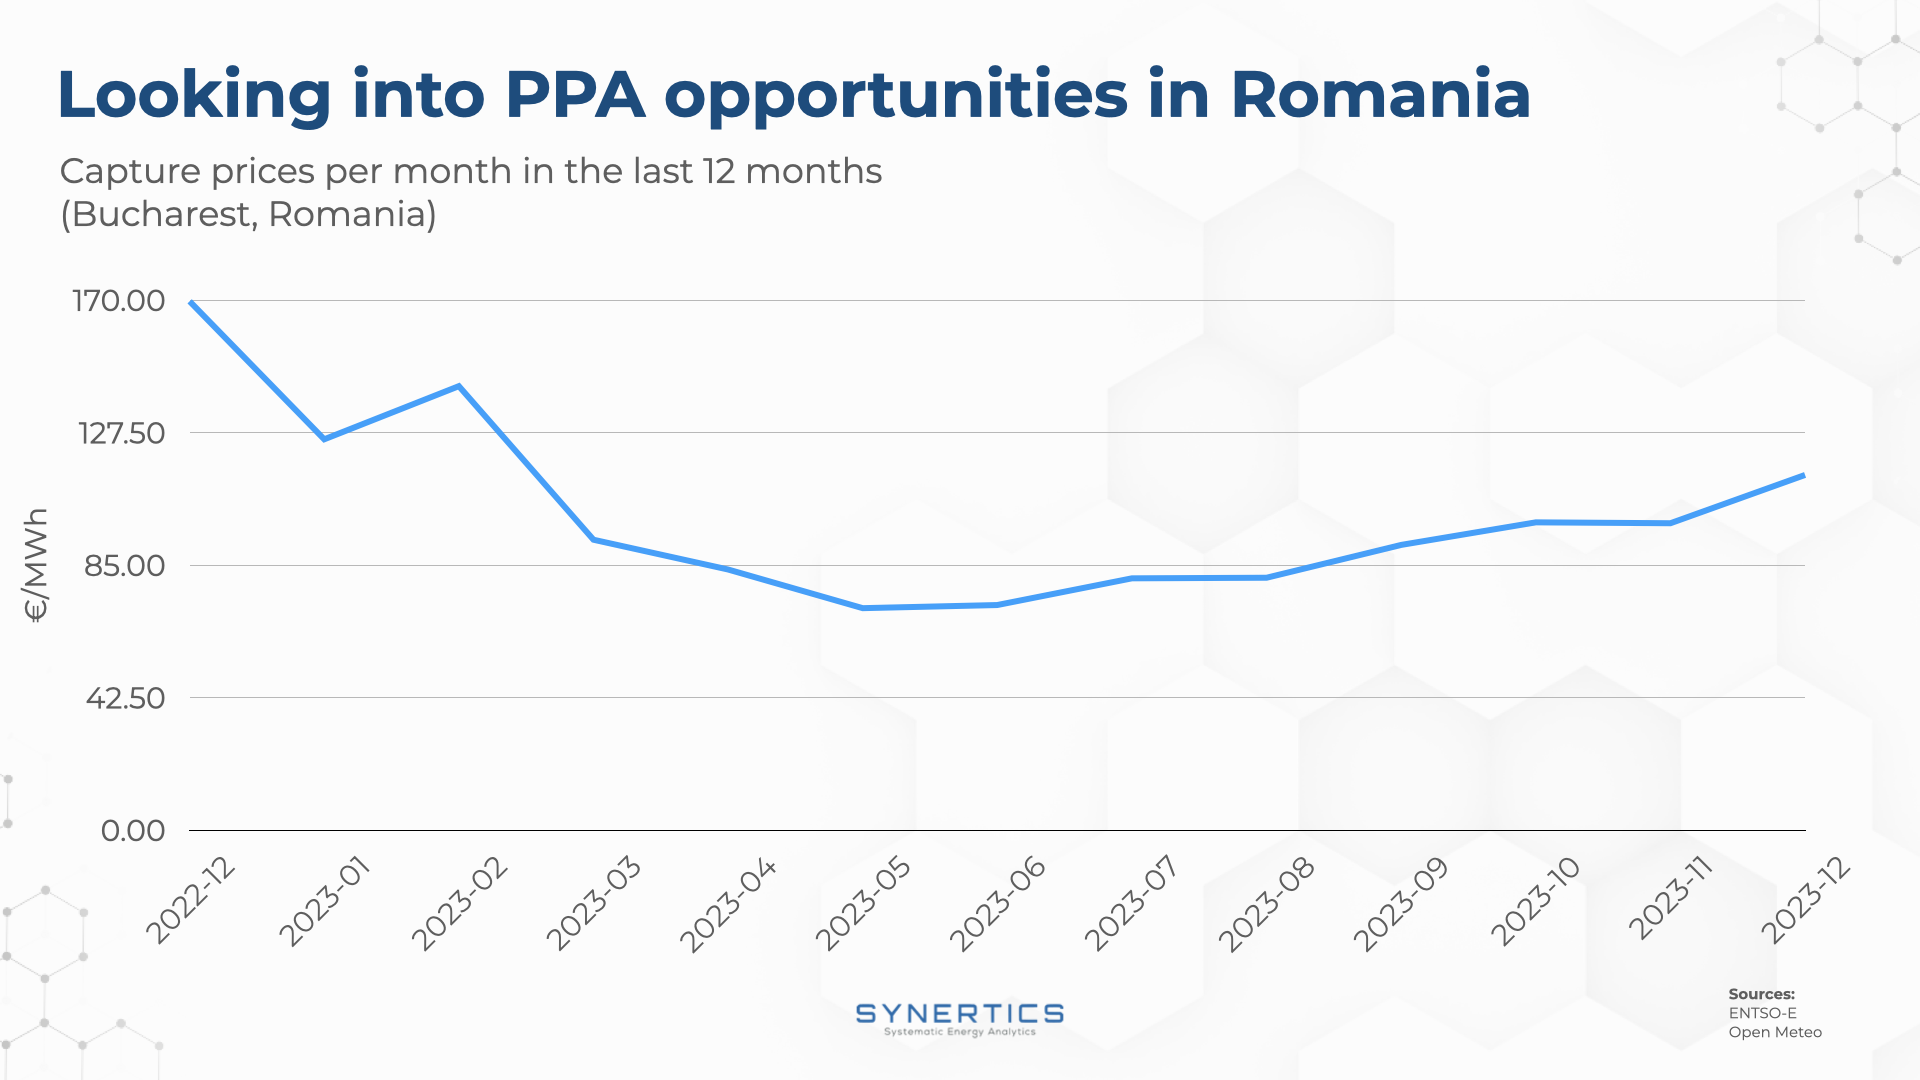 PPA opportunities in Romania - Capture prices